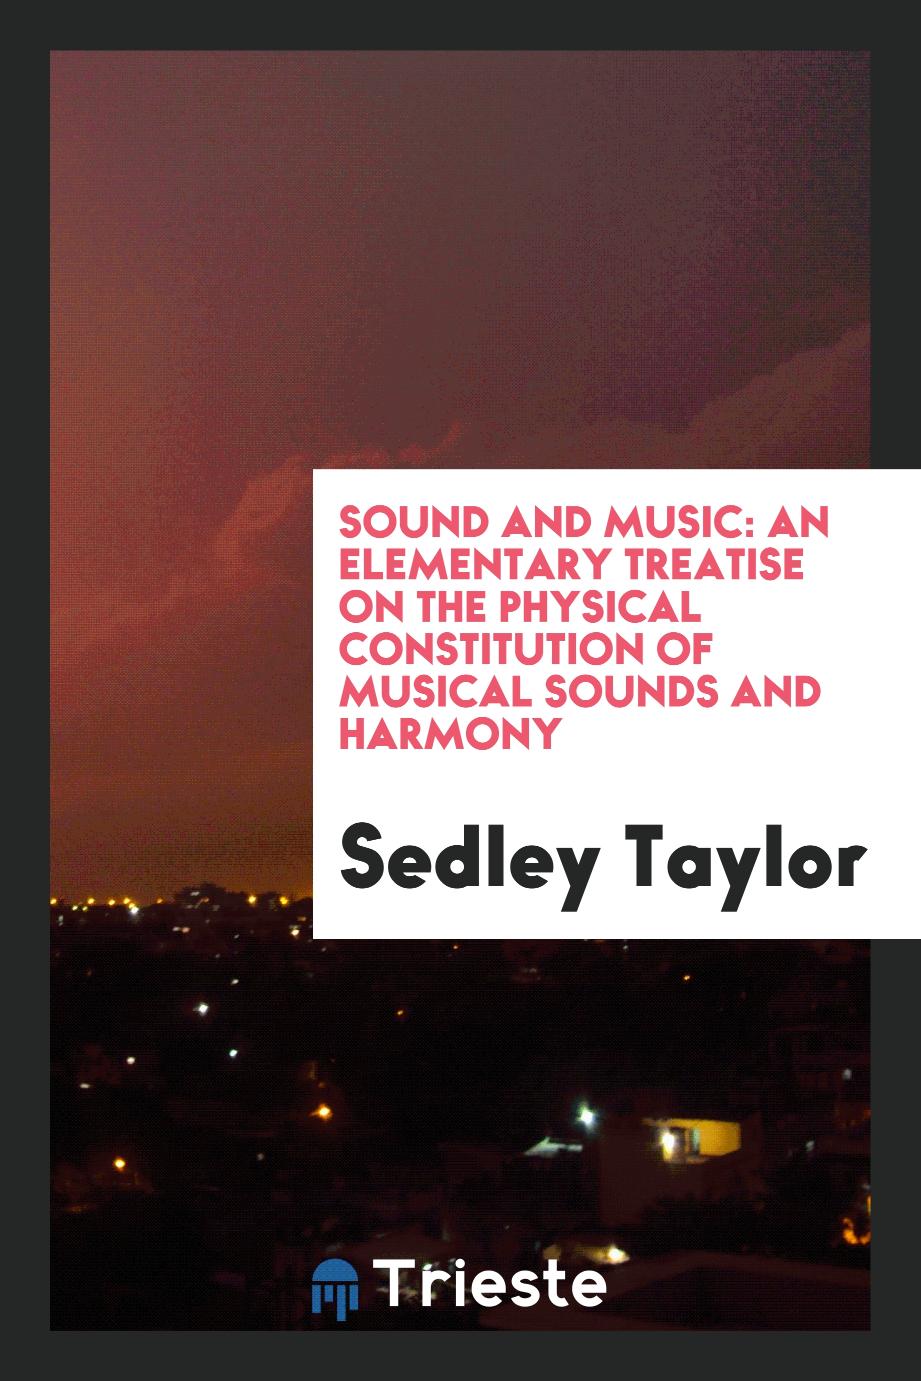 Sound and music: an elementary treatise on the physical constitution of musical sounds and harmony